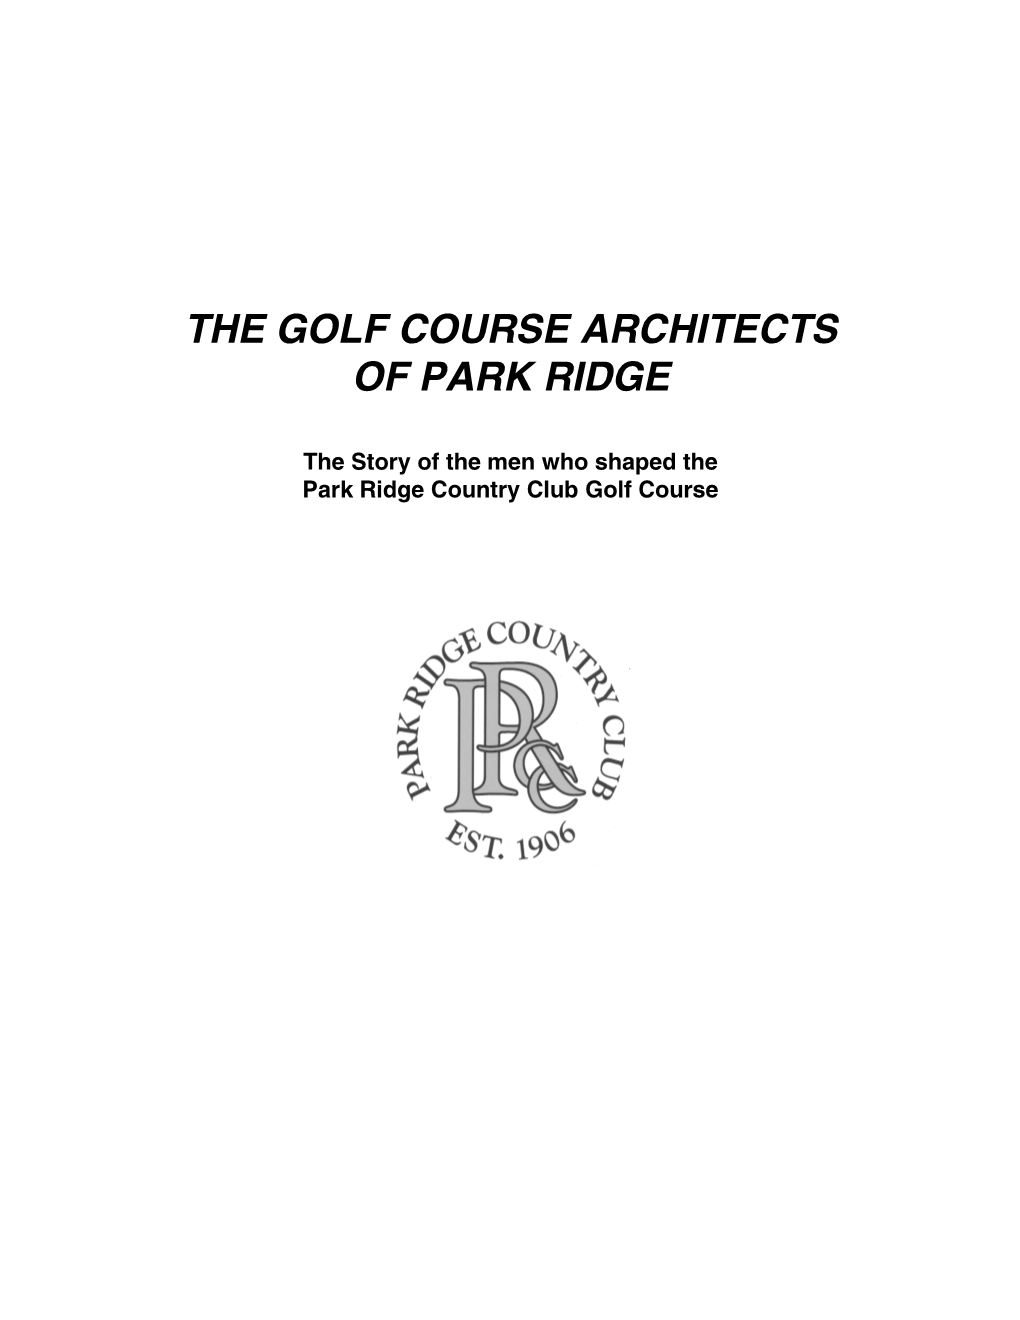 The Golf Course Architects of Park Ridge